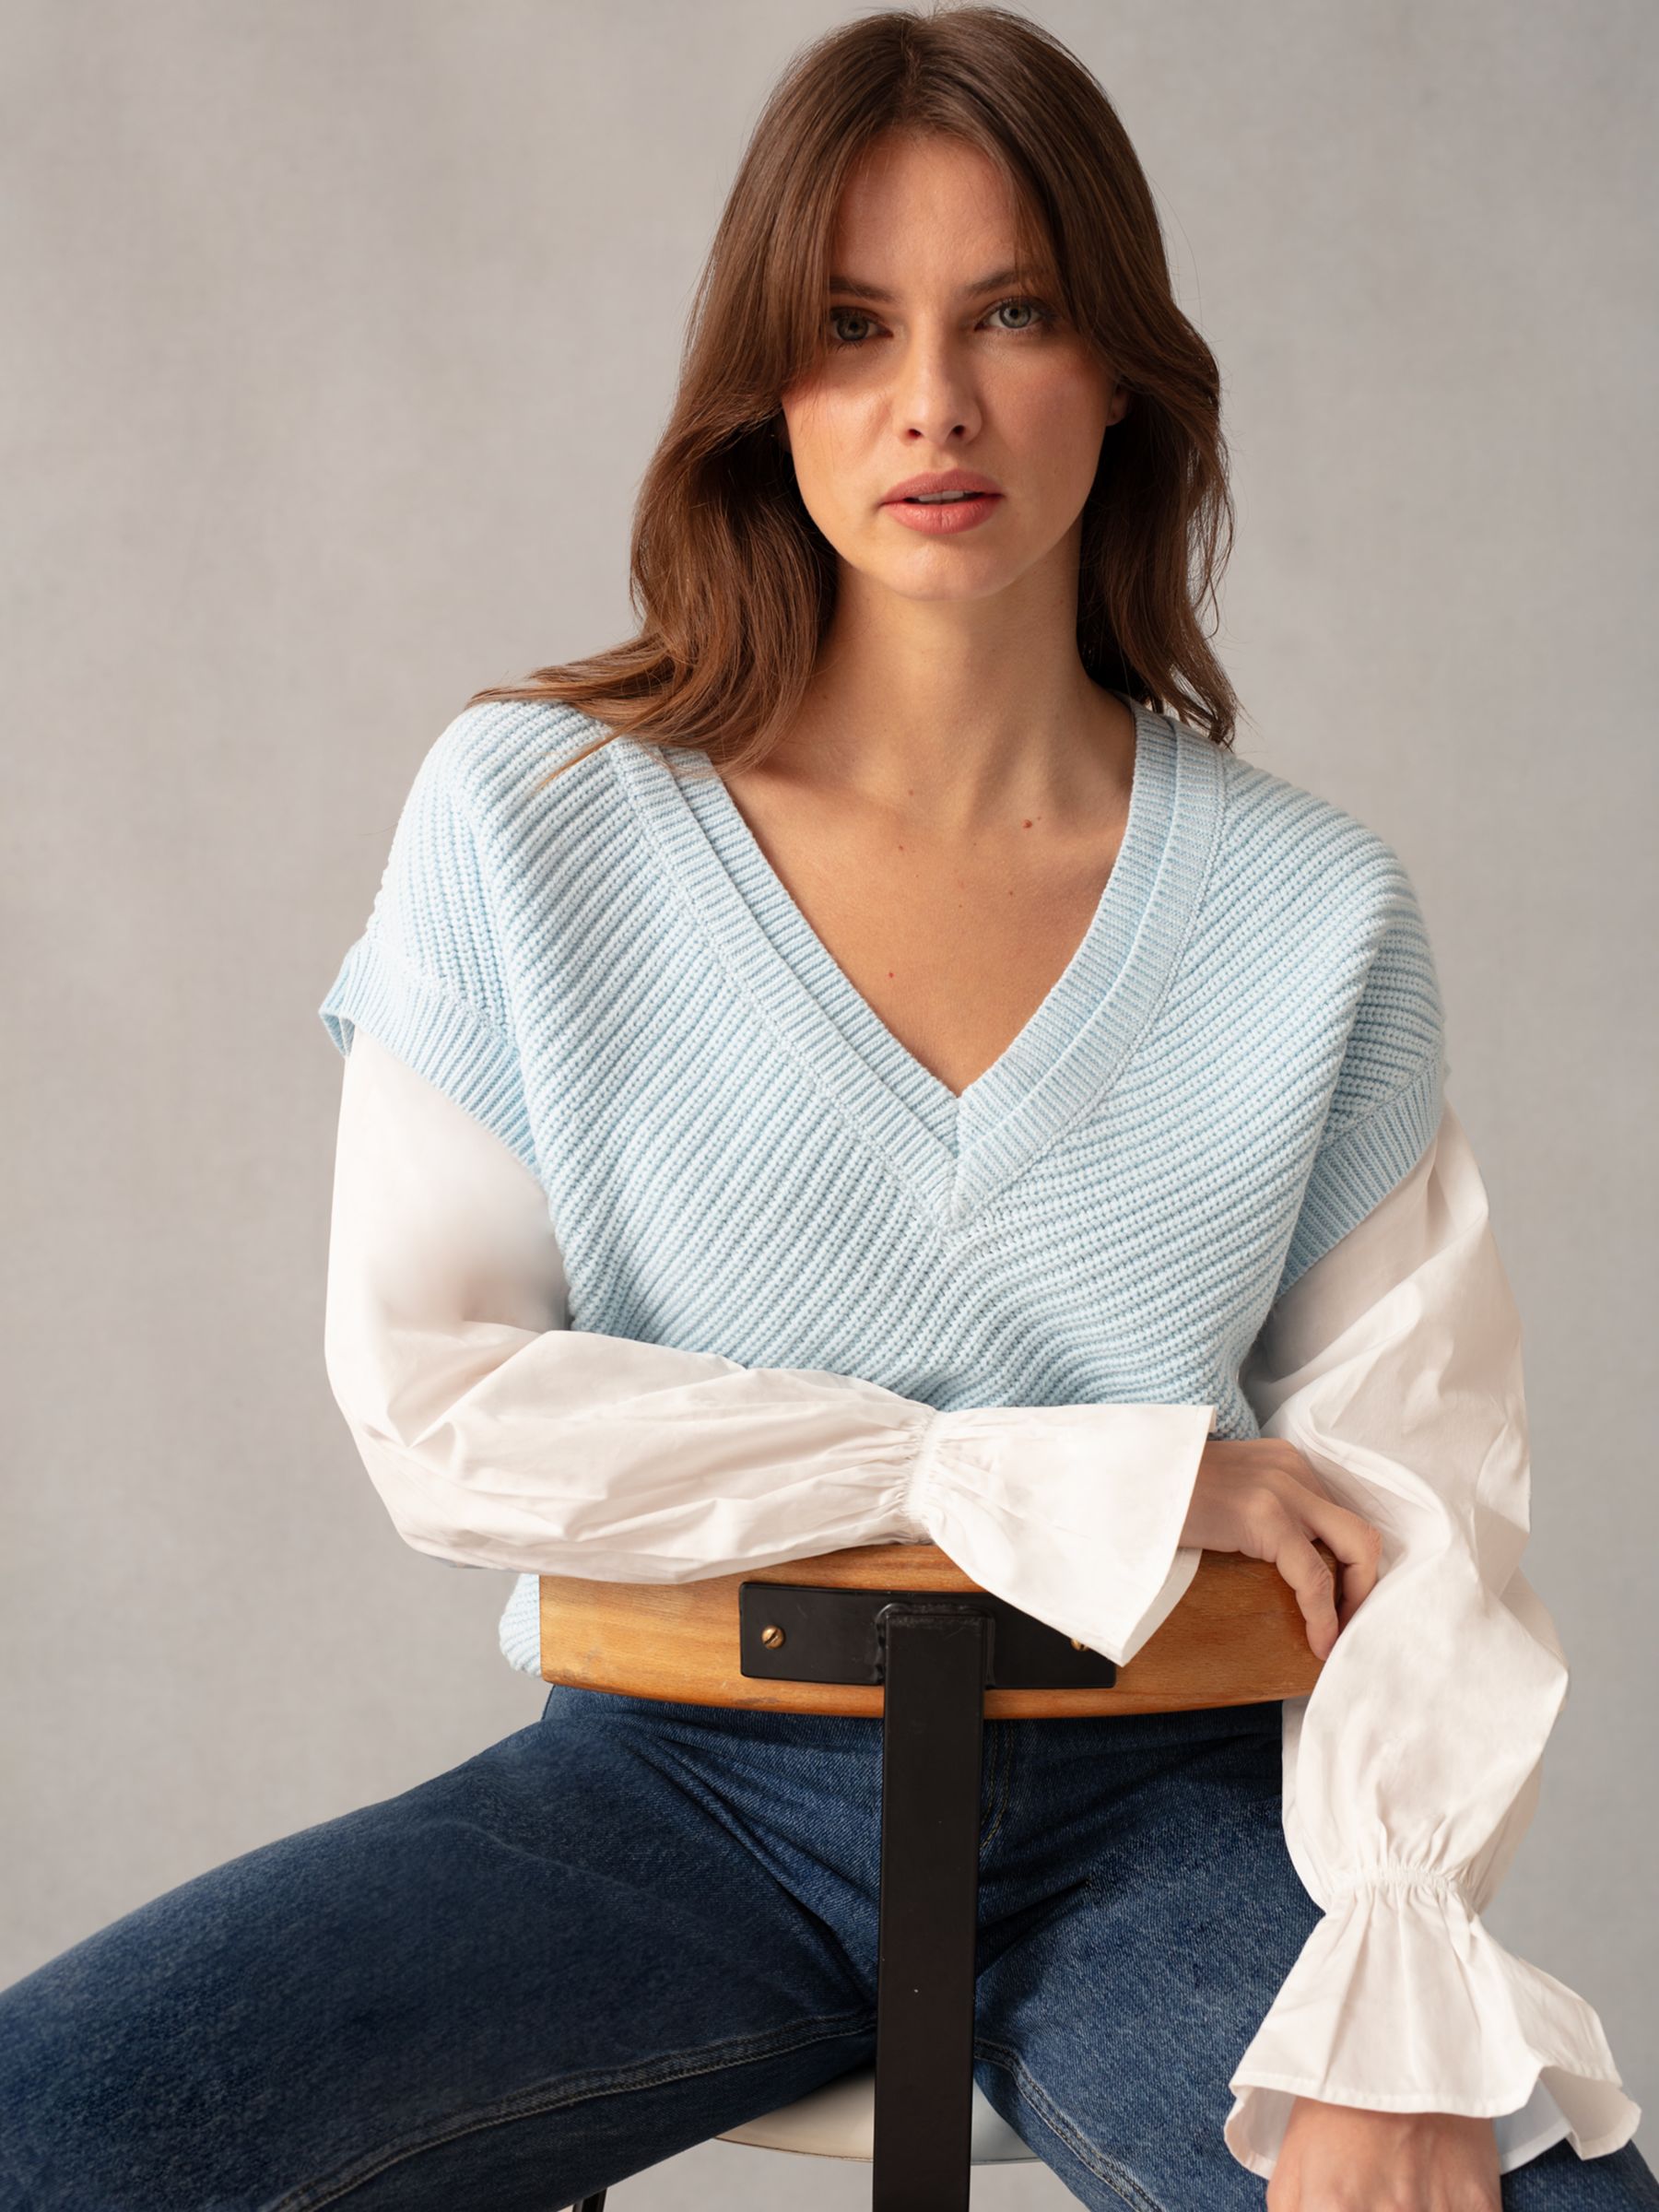 Ro&Zo 2-in-1 Shirt Sleeve Jumper, Blue/White at John Lewis & Partners